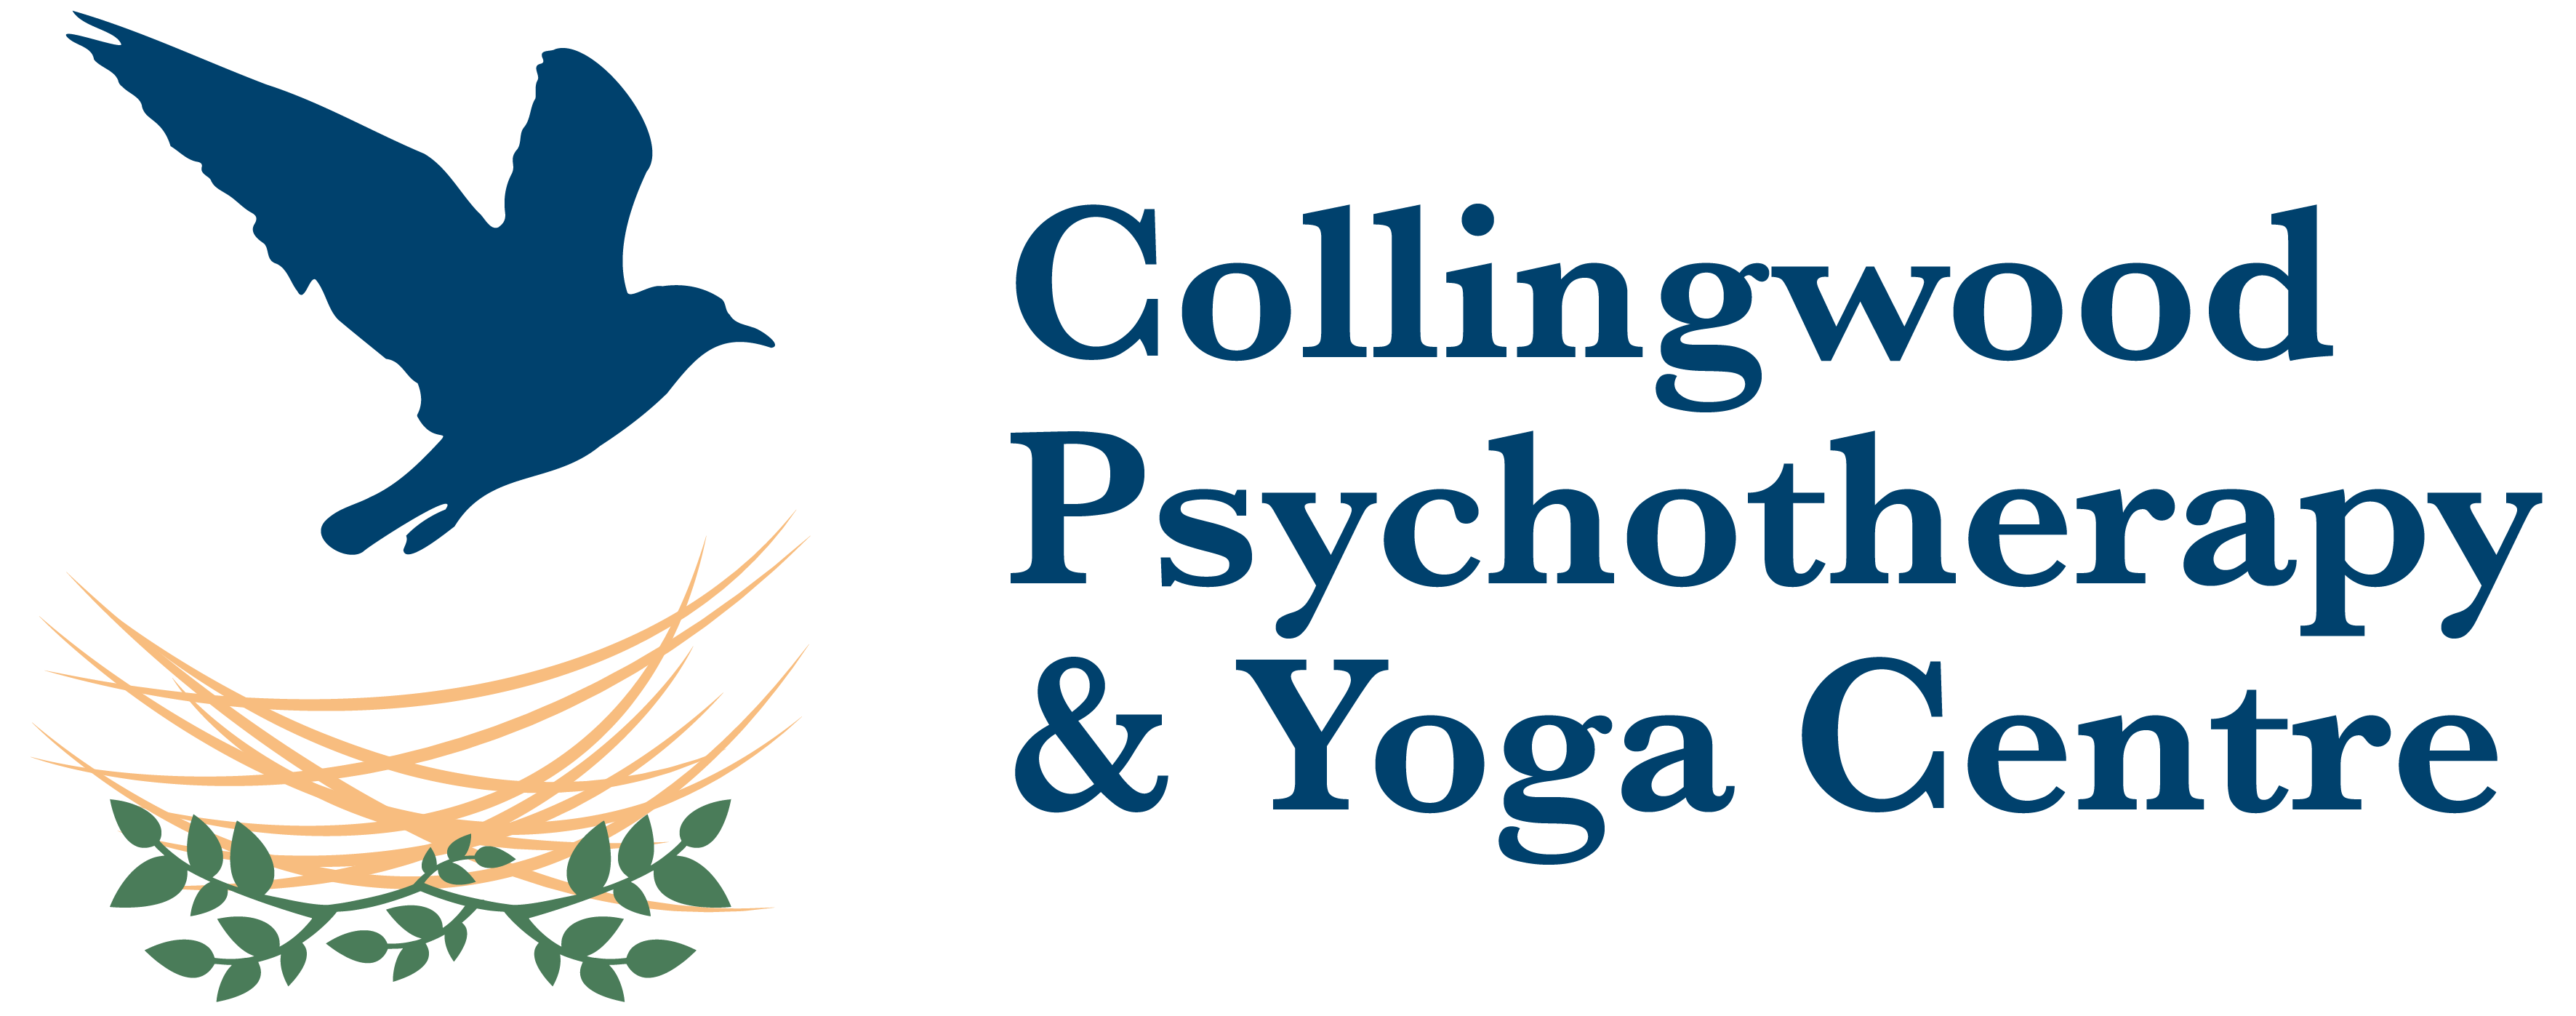 Collingwood Psychotherapy & Yoga Centre